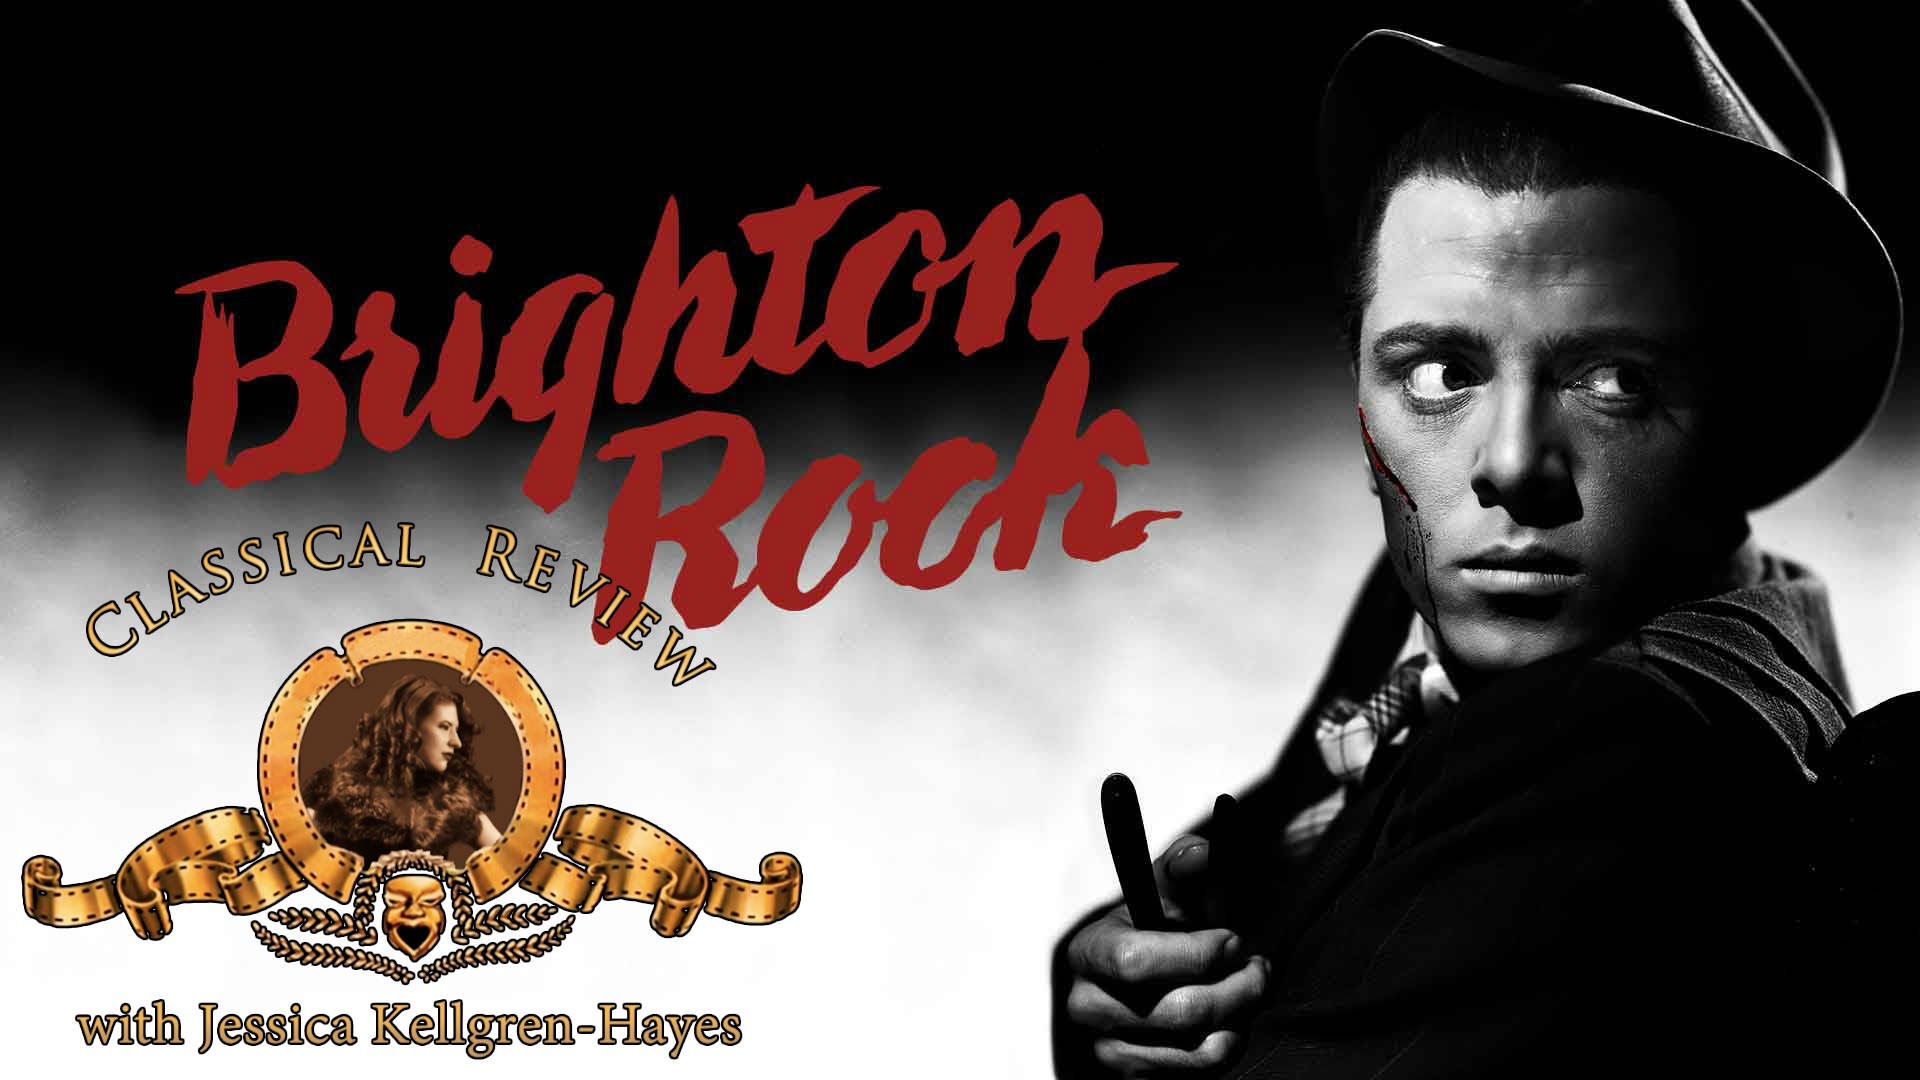 Nice Images Collection: Brighton Rock Desktop Wallpapers